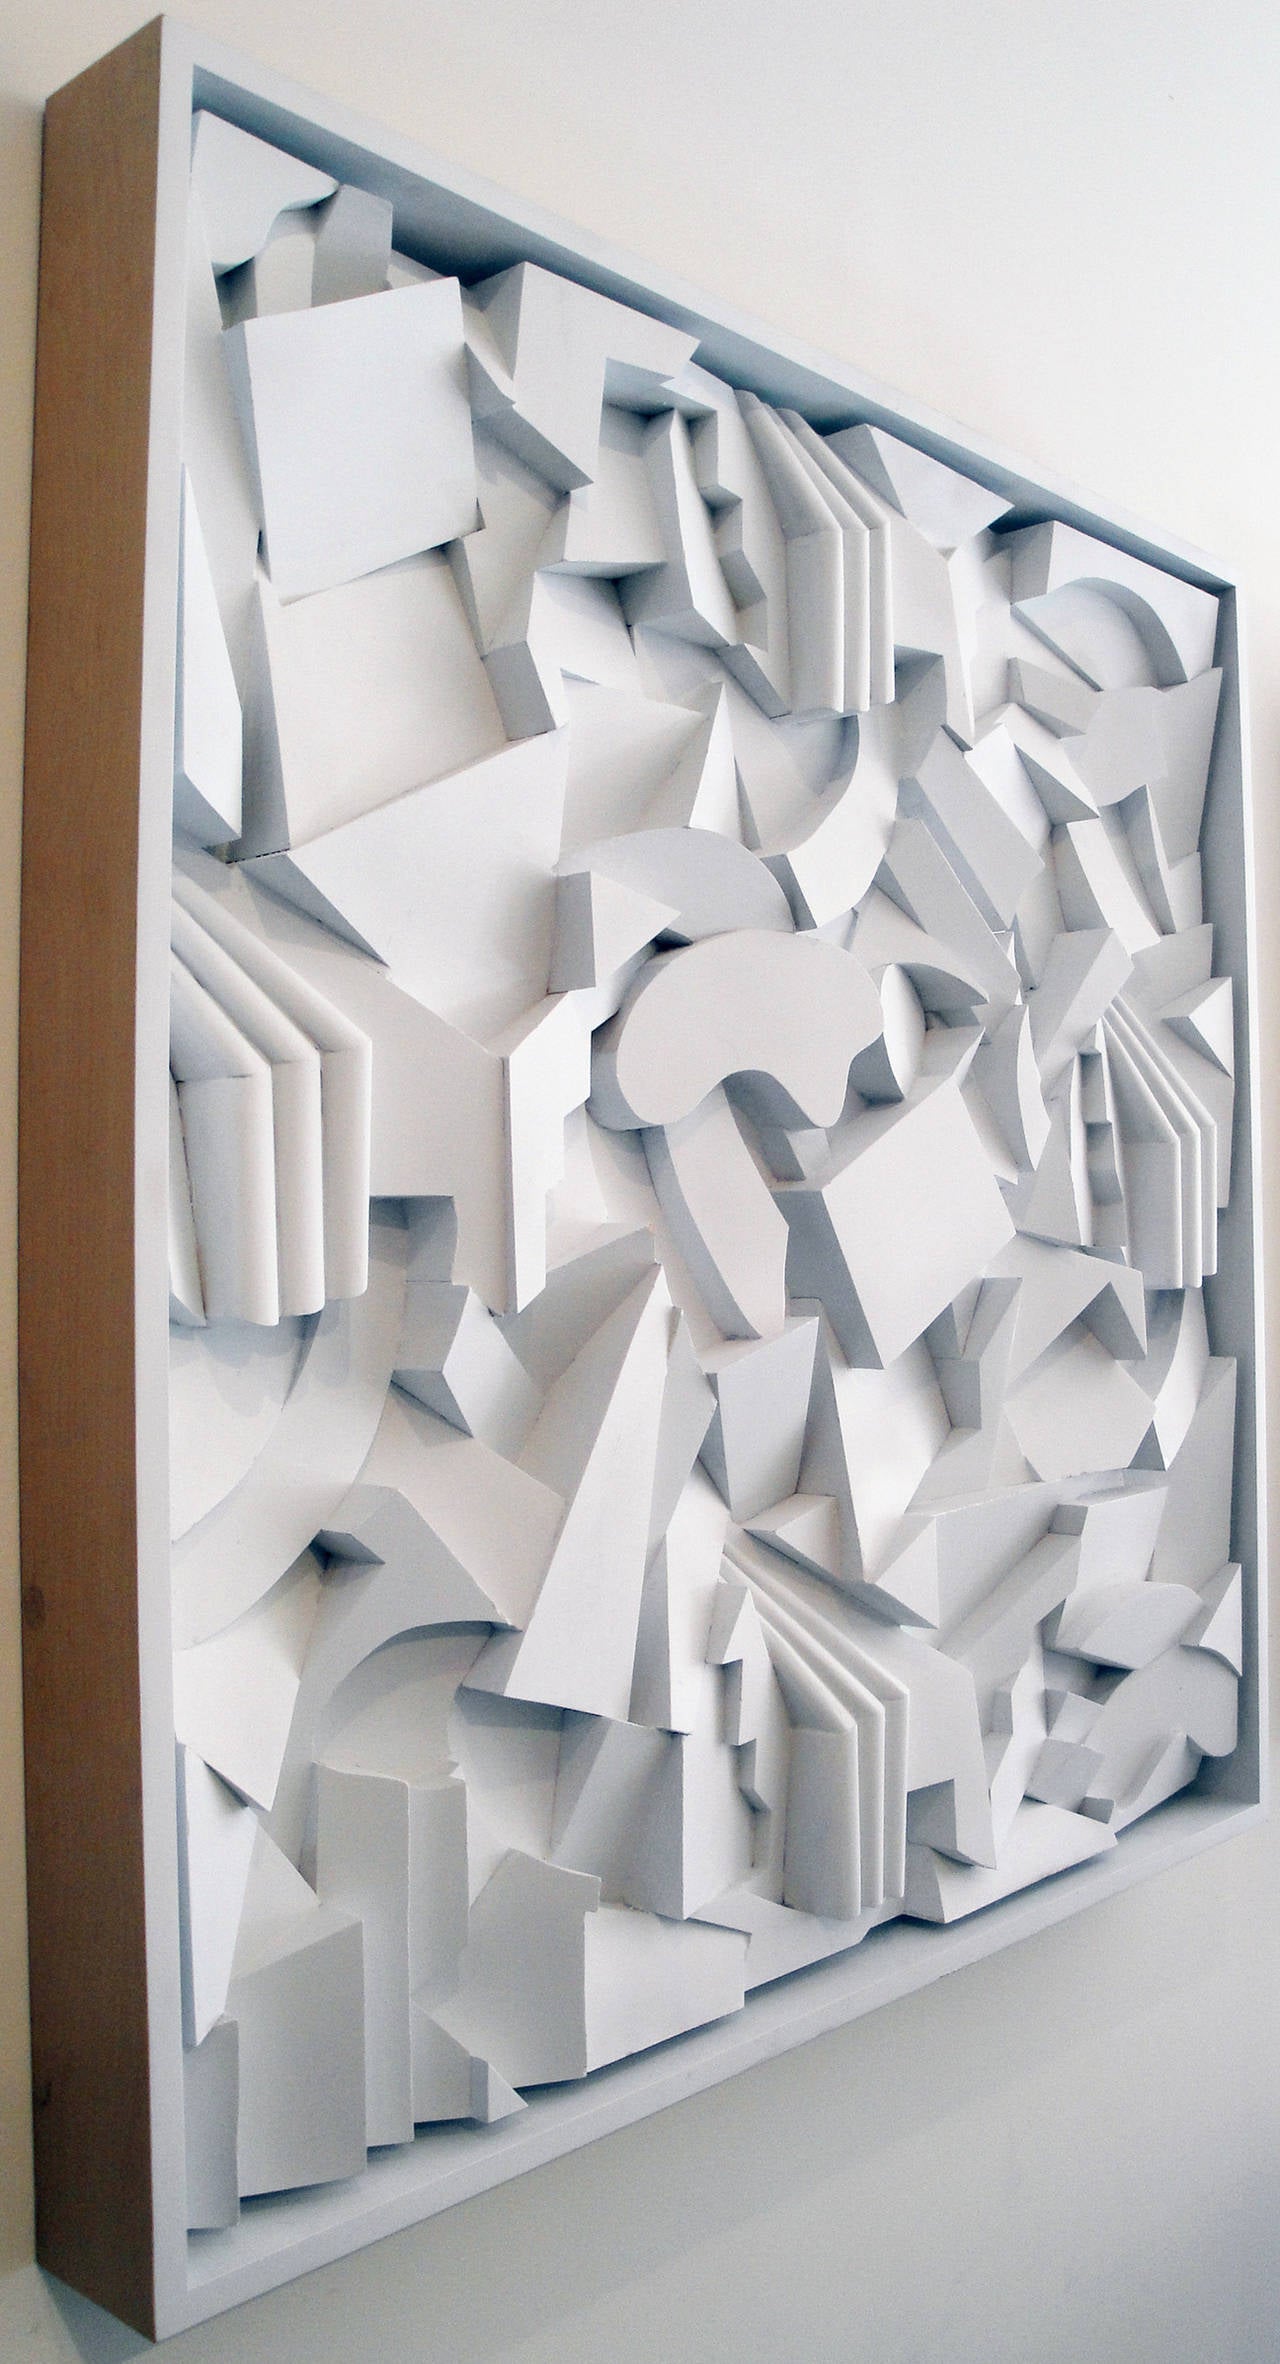 Three dimensional, sculptural piece. White painted wooden elements, framed.
Created by Kazumi Yoshida.